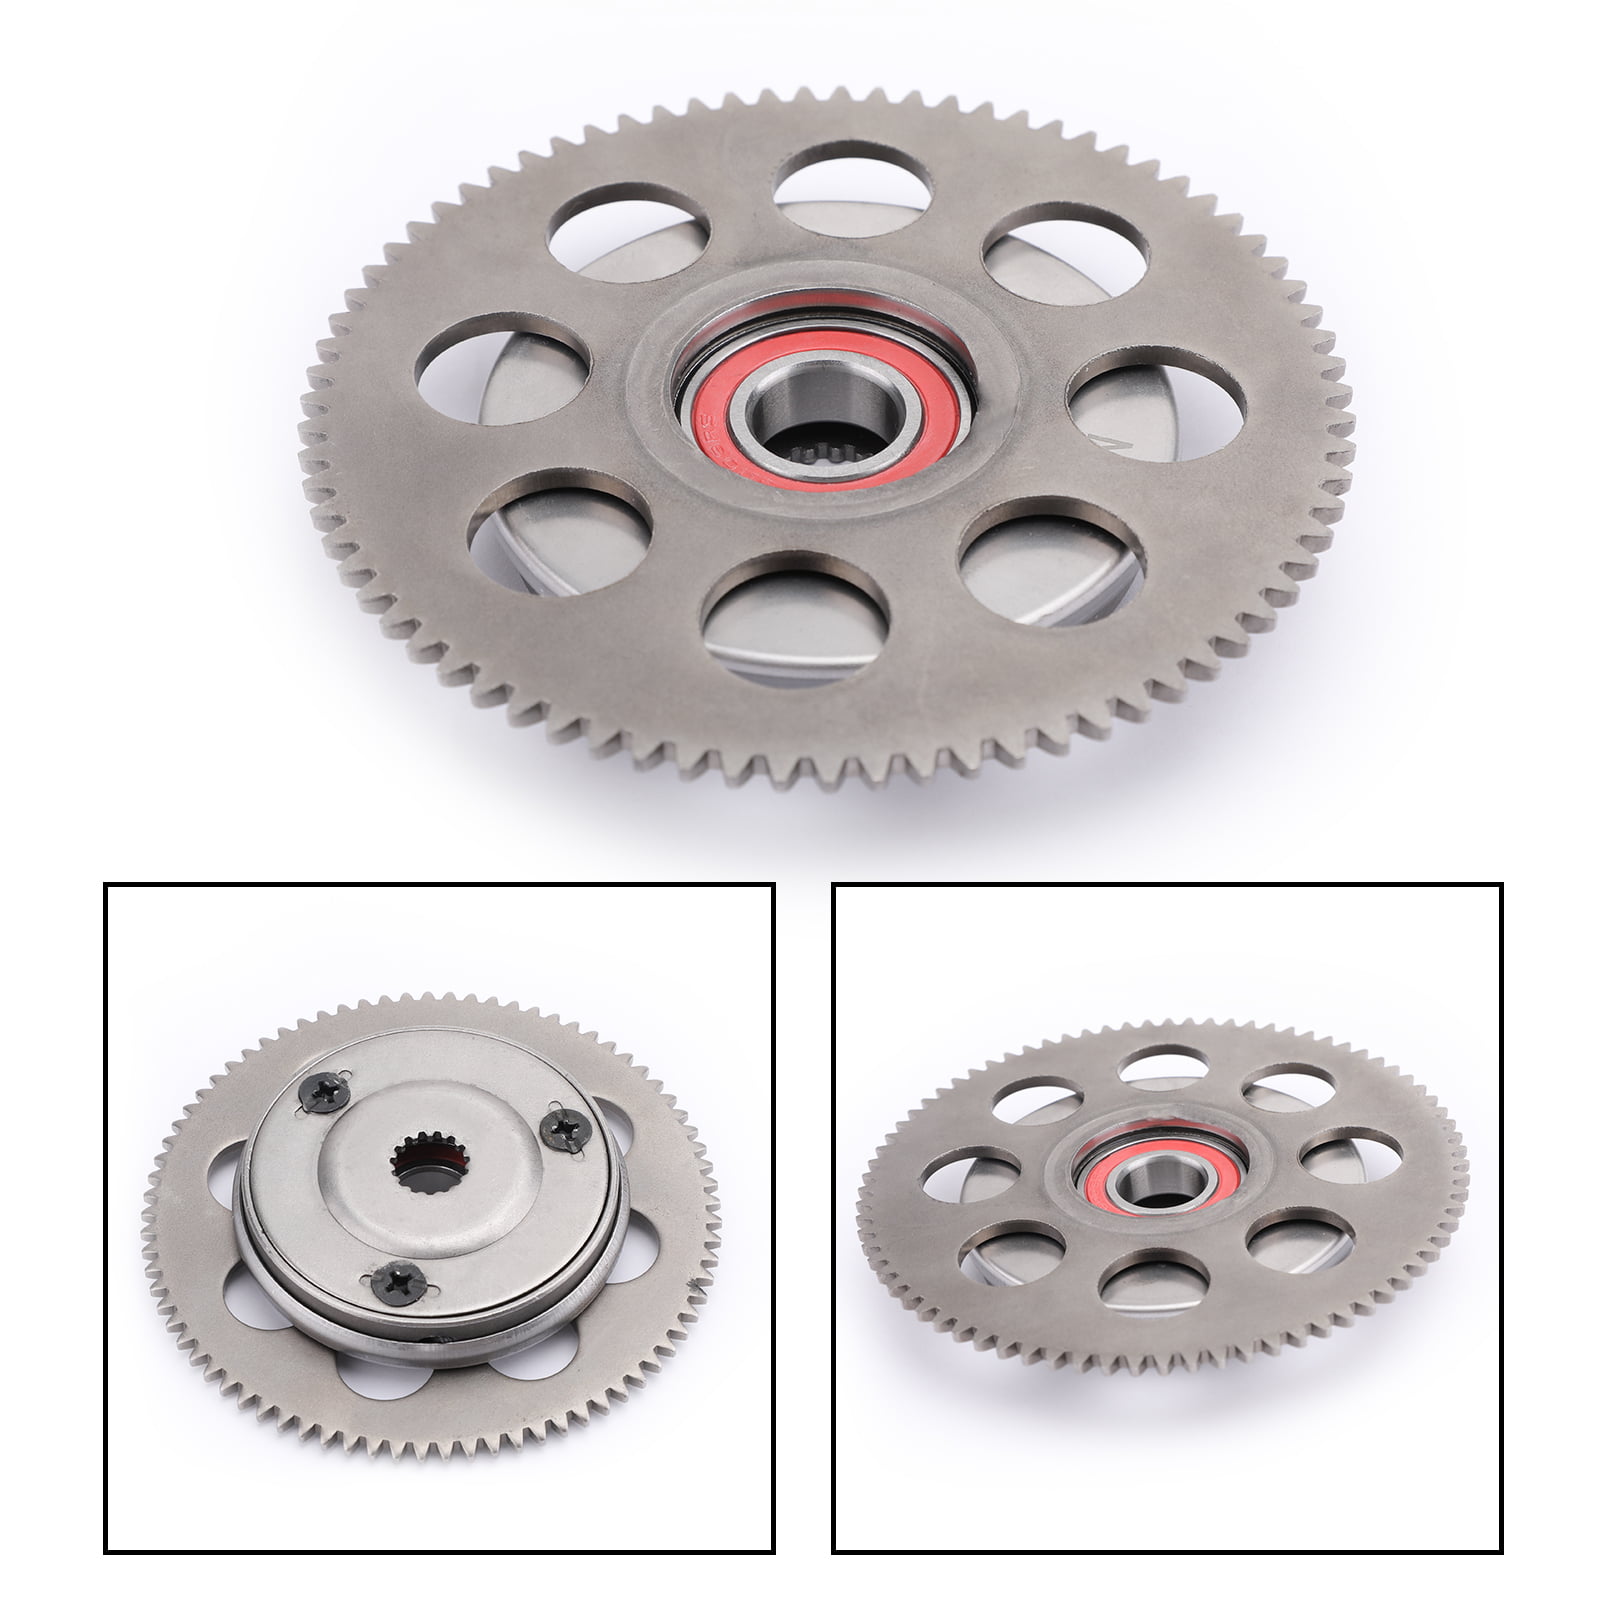 Starter Clutch,MoreChioce One Way Bearing Clutch Kit Fit for Polaris Outlaw Sportsman 90 2007-2014/2016 50 2008-2018 110 2016-2018 12600-45850 12600-29810 13216-S010 3445-031 